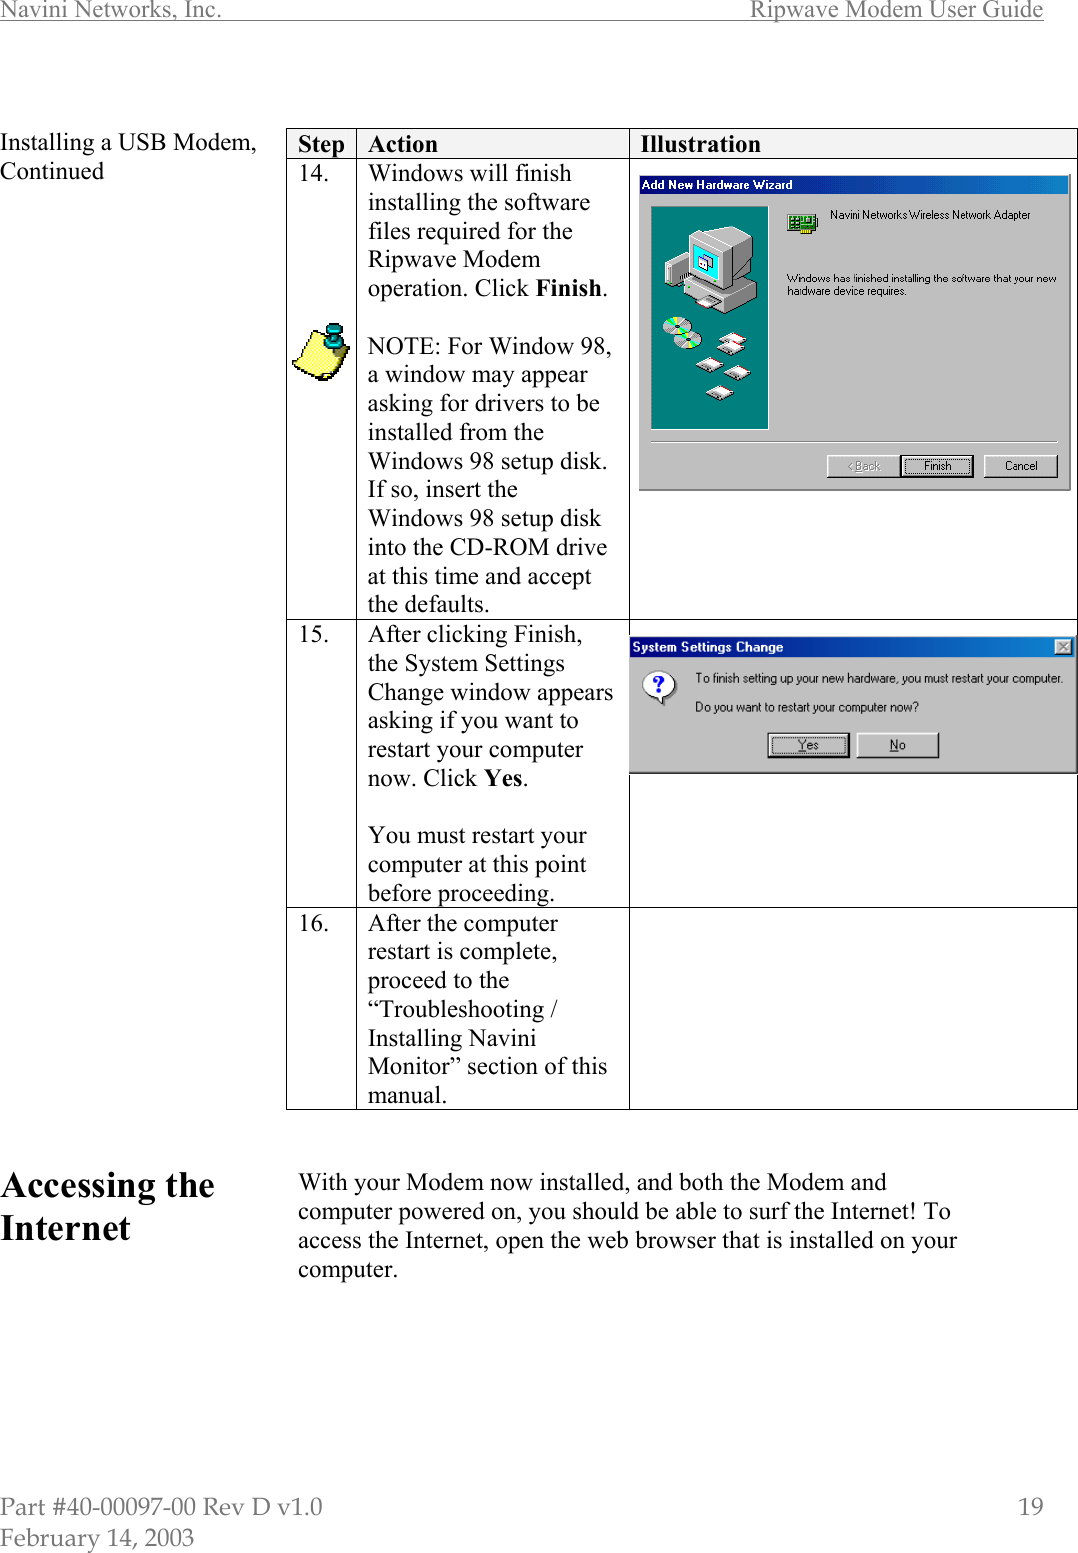 Navini Networks, Inc.        Ripwave Modem User Guide Part #40-00097-00 Rev D v1.0                         19 February 14, 2003  Installing a USB Modem, Continued                                   Accessing the Internet        Step  Action  Illustration 14.  Windows will finish installing the software files required for the Ripwave Modem operation. Click Finish.  NOTE: For Window 98, a window may appear asking for drivers to be installed from the Windows 98 setup disk. If so, insert the Windows 98 setup disk into the CD-ROM drive at this time and accept the defaults.  15.  After clicking Finish, the System Settings Change window appears asking if you want to restart your computer now. Click Yes.  You must restart your computer at this point before proceeding.  16.  After the computer restart is complete, proceed to the “Troubleshooting / Installing Navini Monitor” section of this manual.    With your Modem now installed, and both the Modem and computer powered on, you should be able to surf the Internet! To access the Internet, open the web browser that is installed on your computer.       